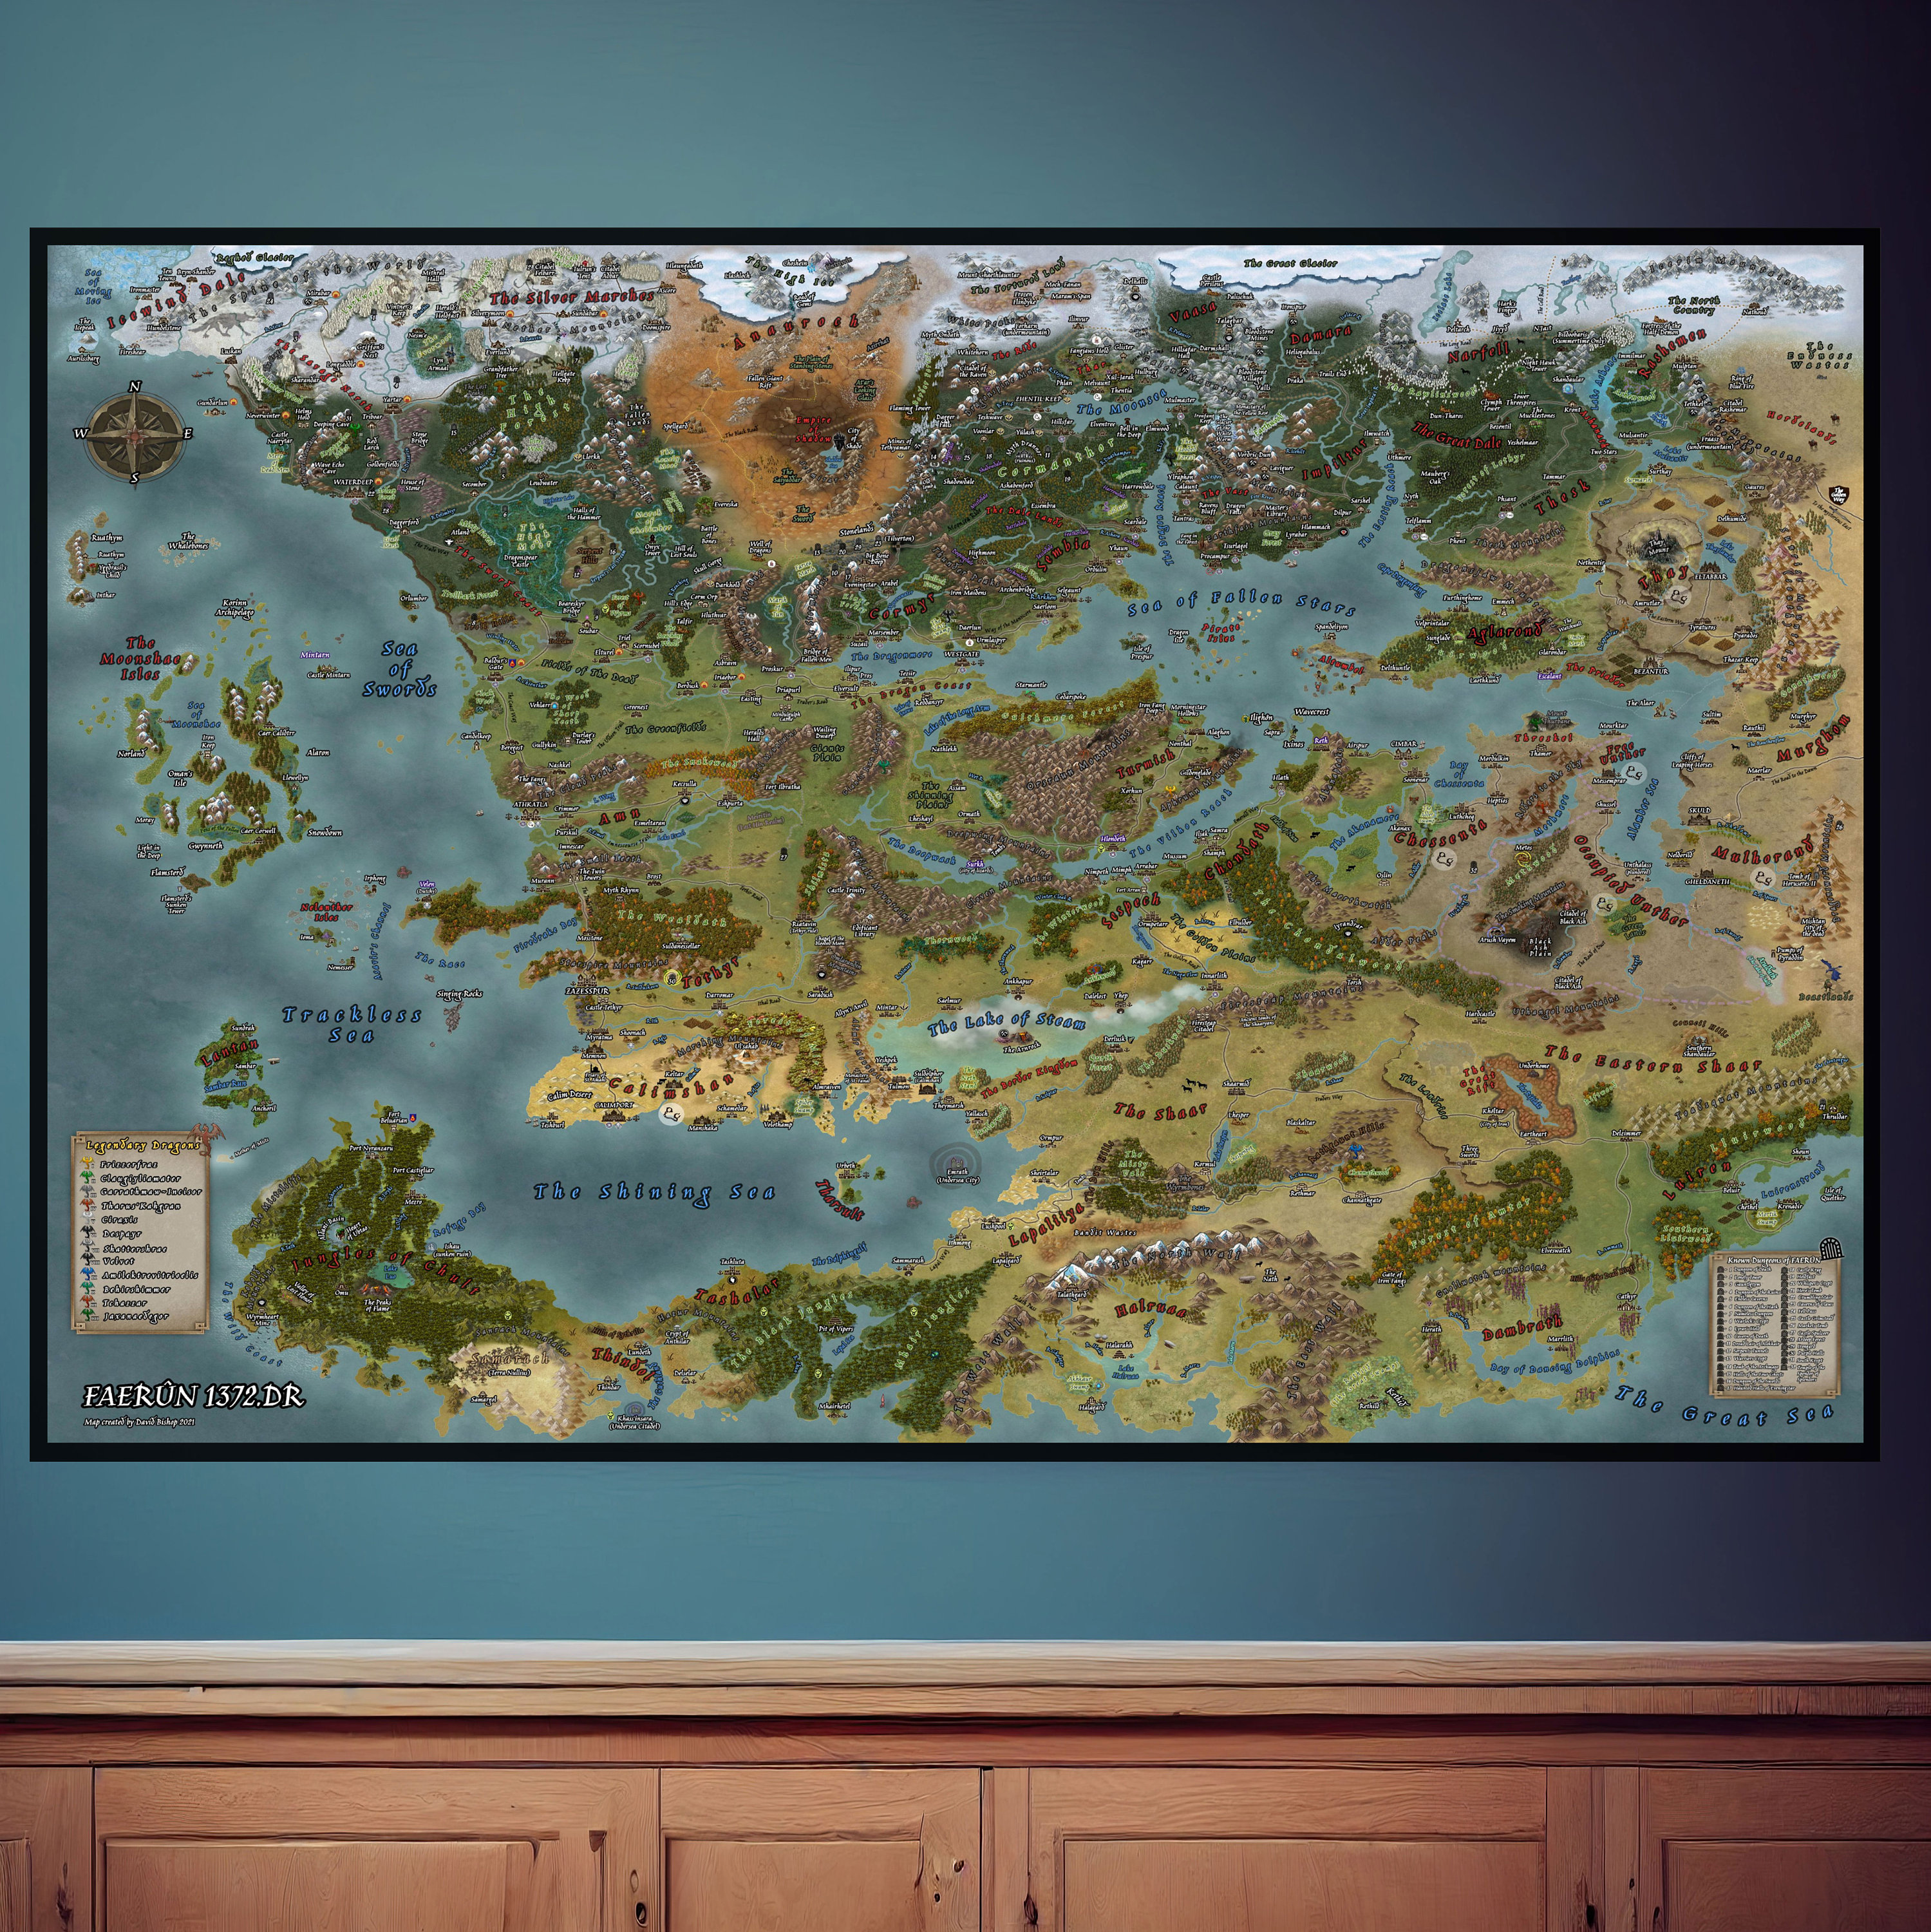 Beleriand and Middle Earth Silmarillion Map - Fantasy Lord of the Rings The  Hobbit Poster Print (11x17 inches)